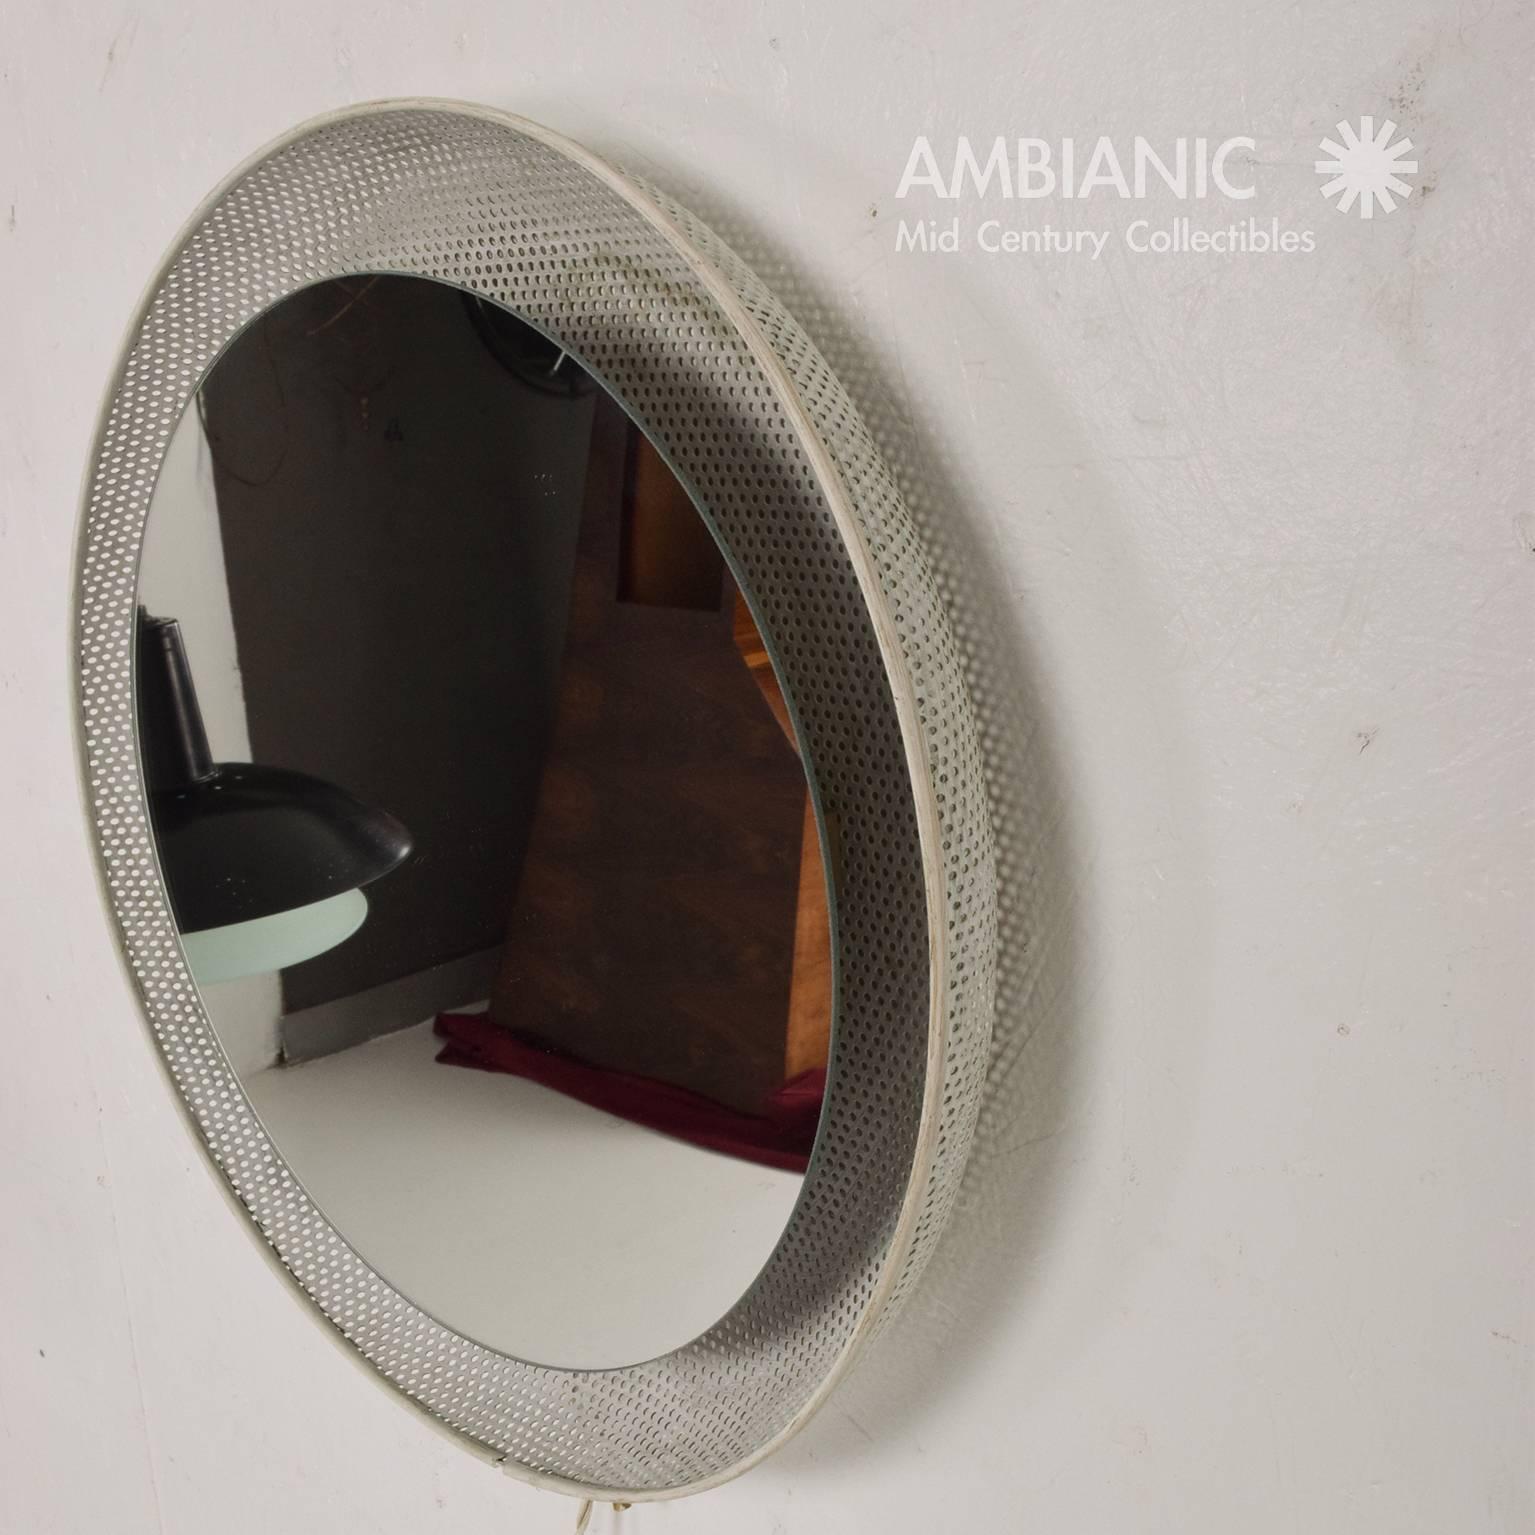 For your consideration a vintage wall mirror with built in light. It is recommended that the light be hardwired, however it has an electric cord with a US plug. Perforated metal is painted in white. 17 1/4